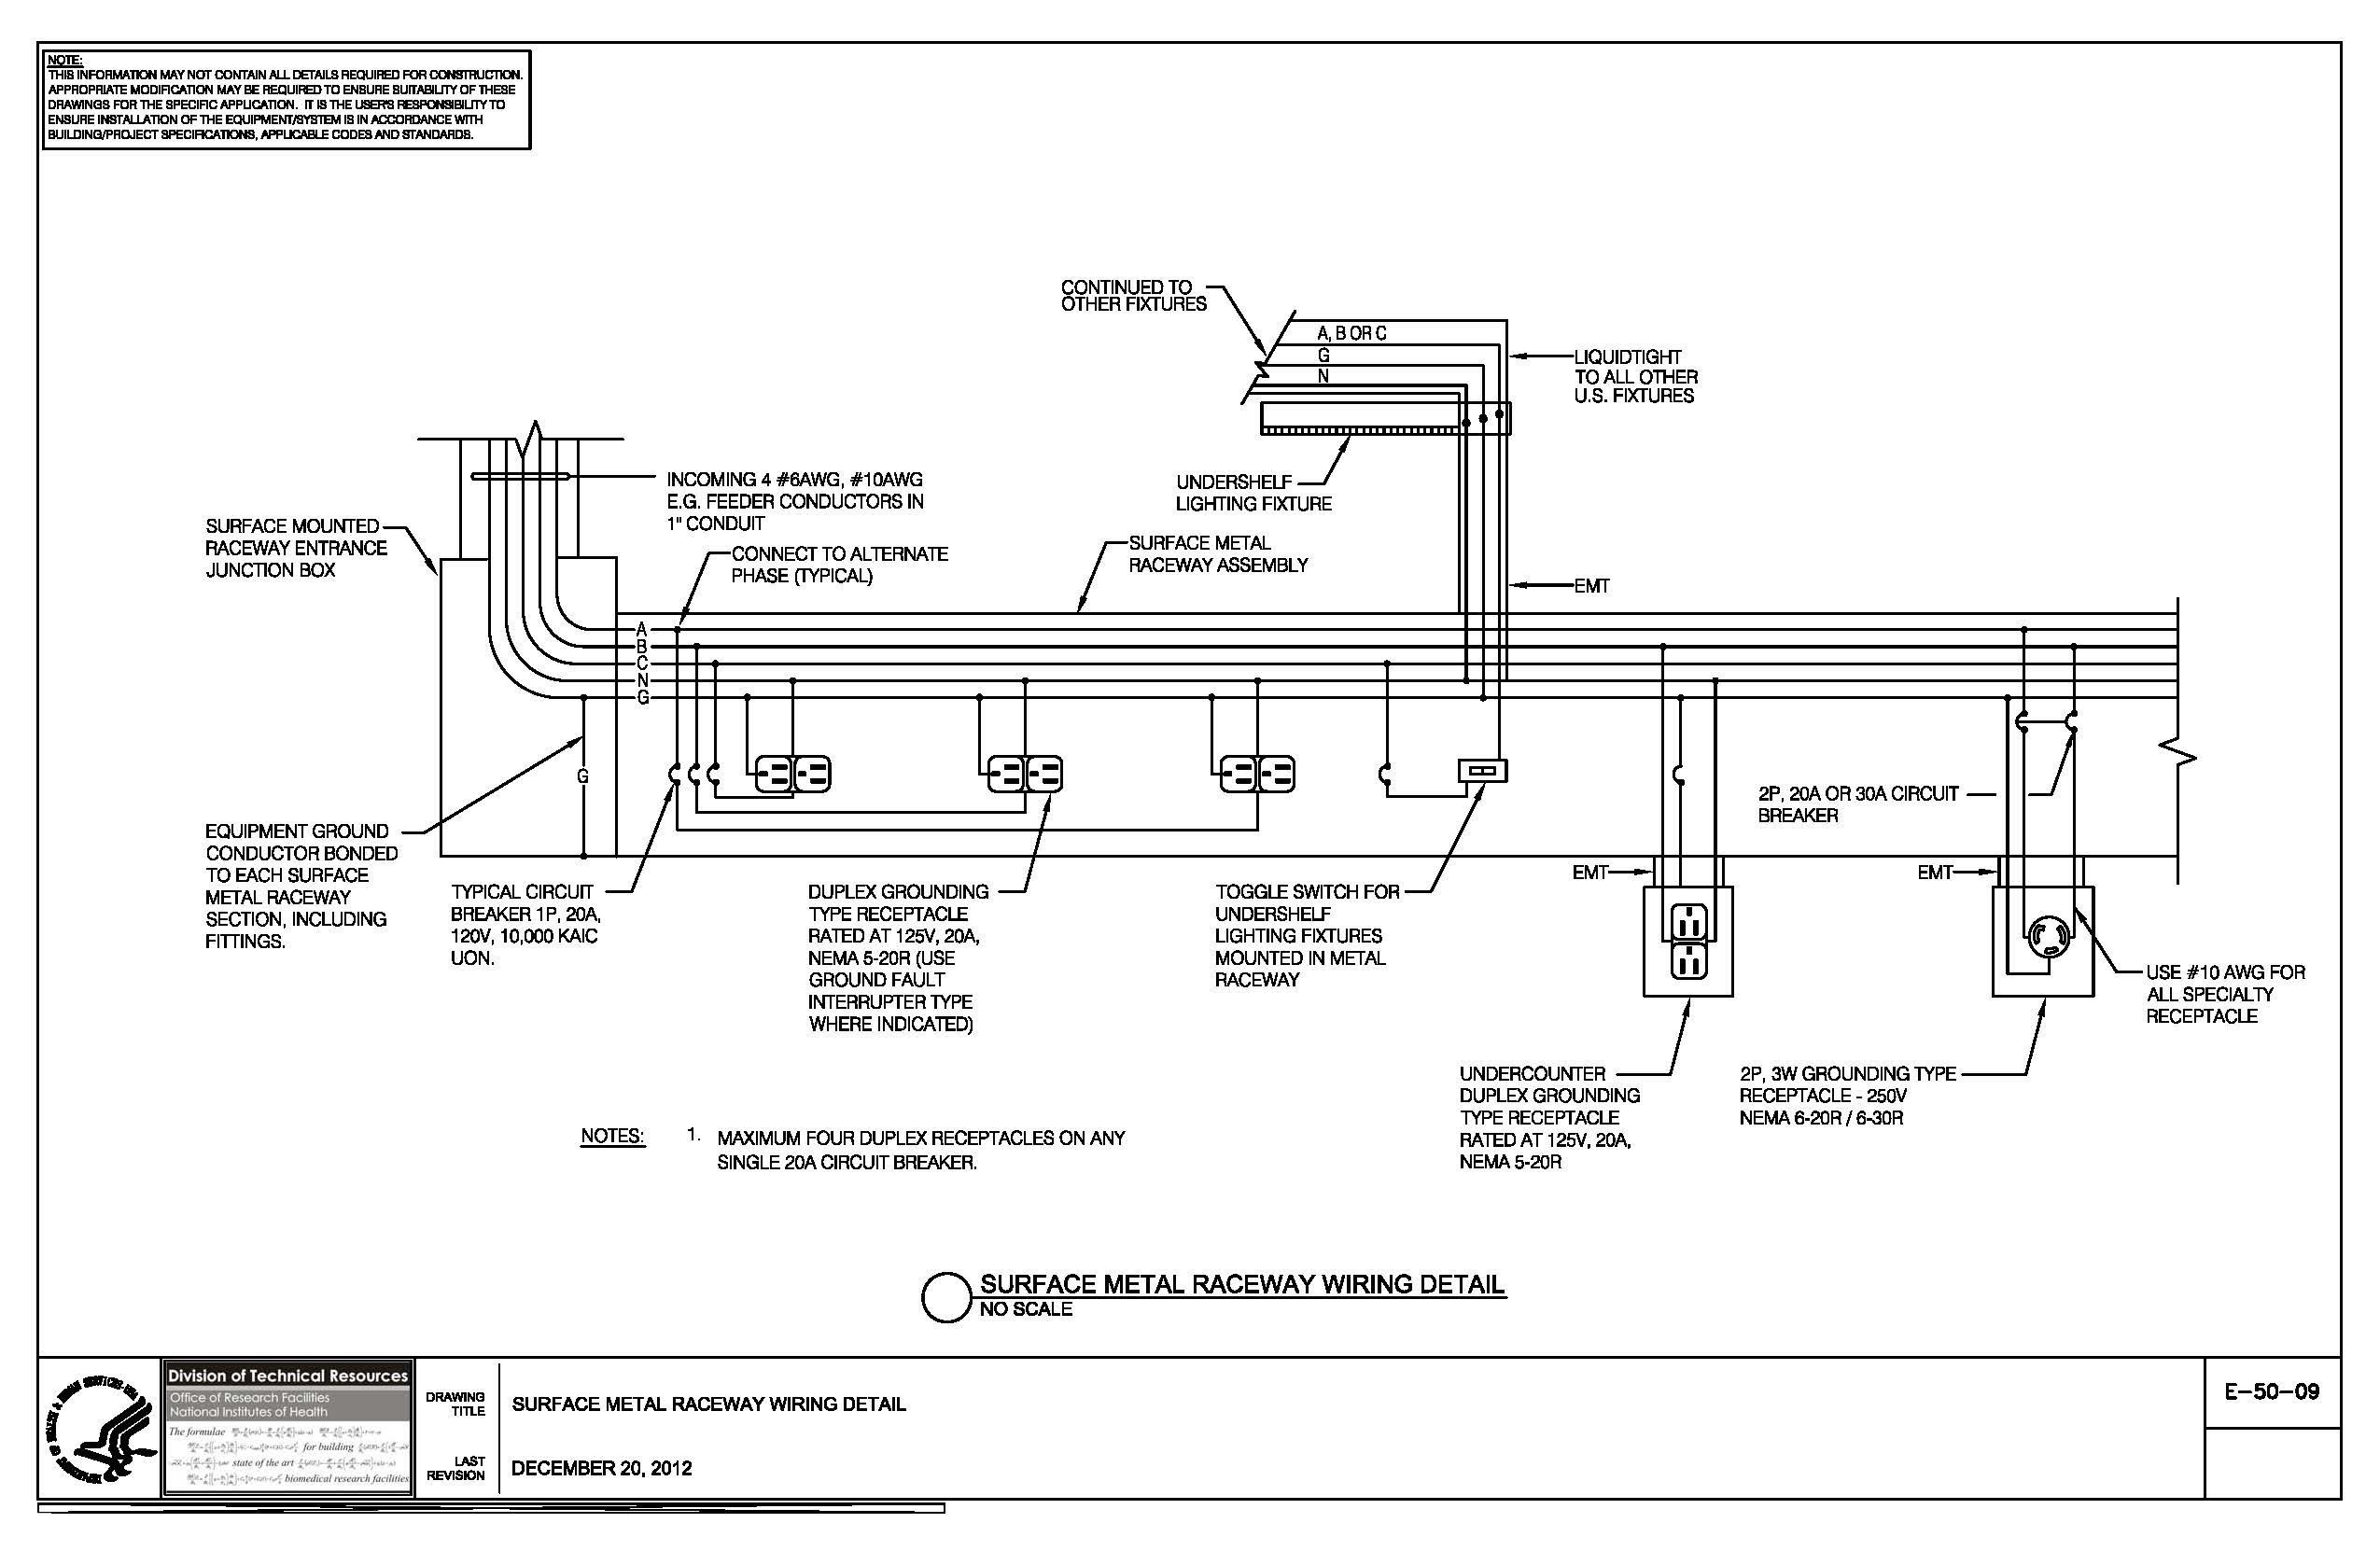 House Wiring Plan Drawing Inspirational L2archive Page 4 47 Diagram Sample and Diagrams Downloads